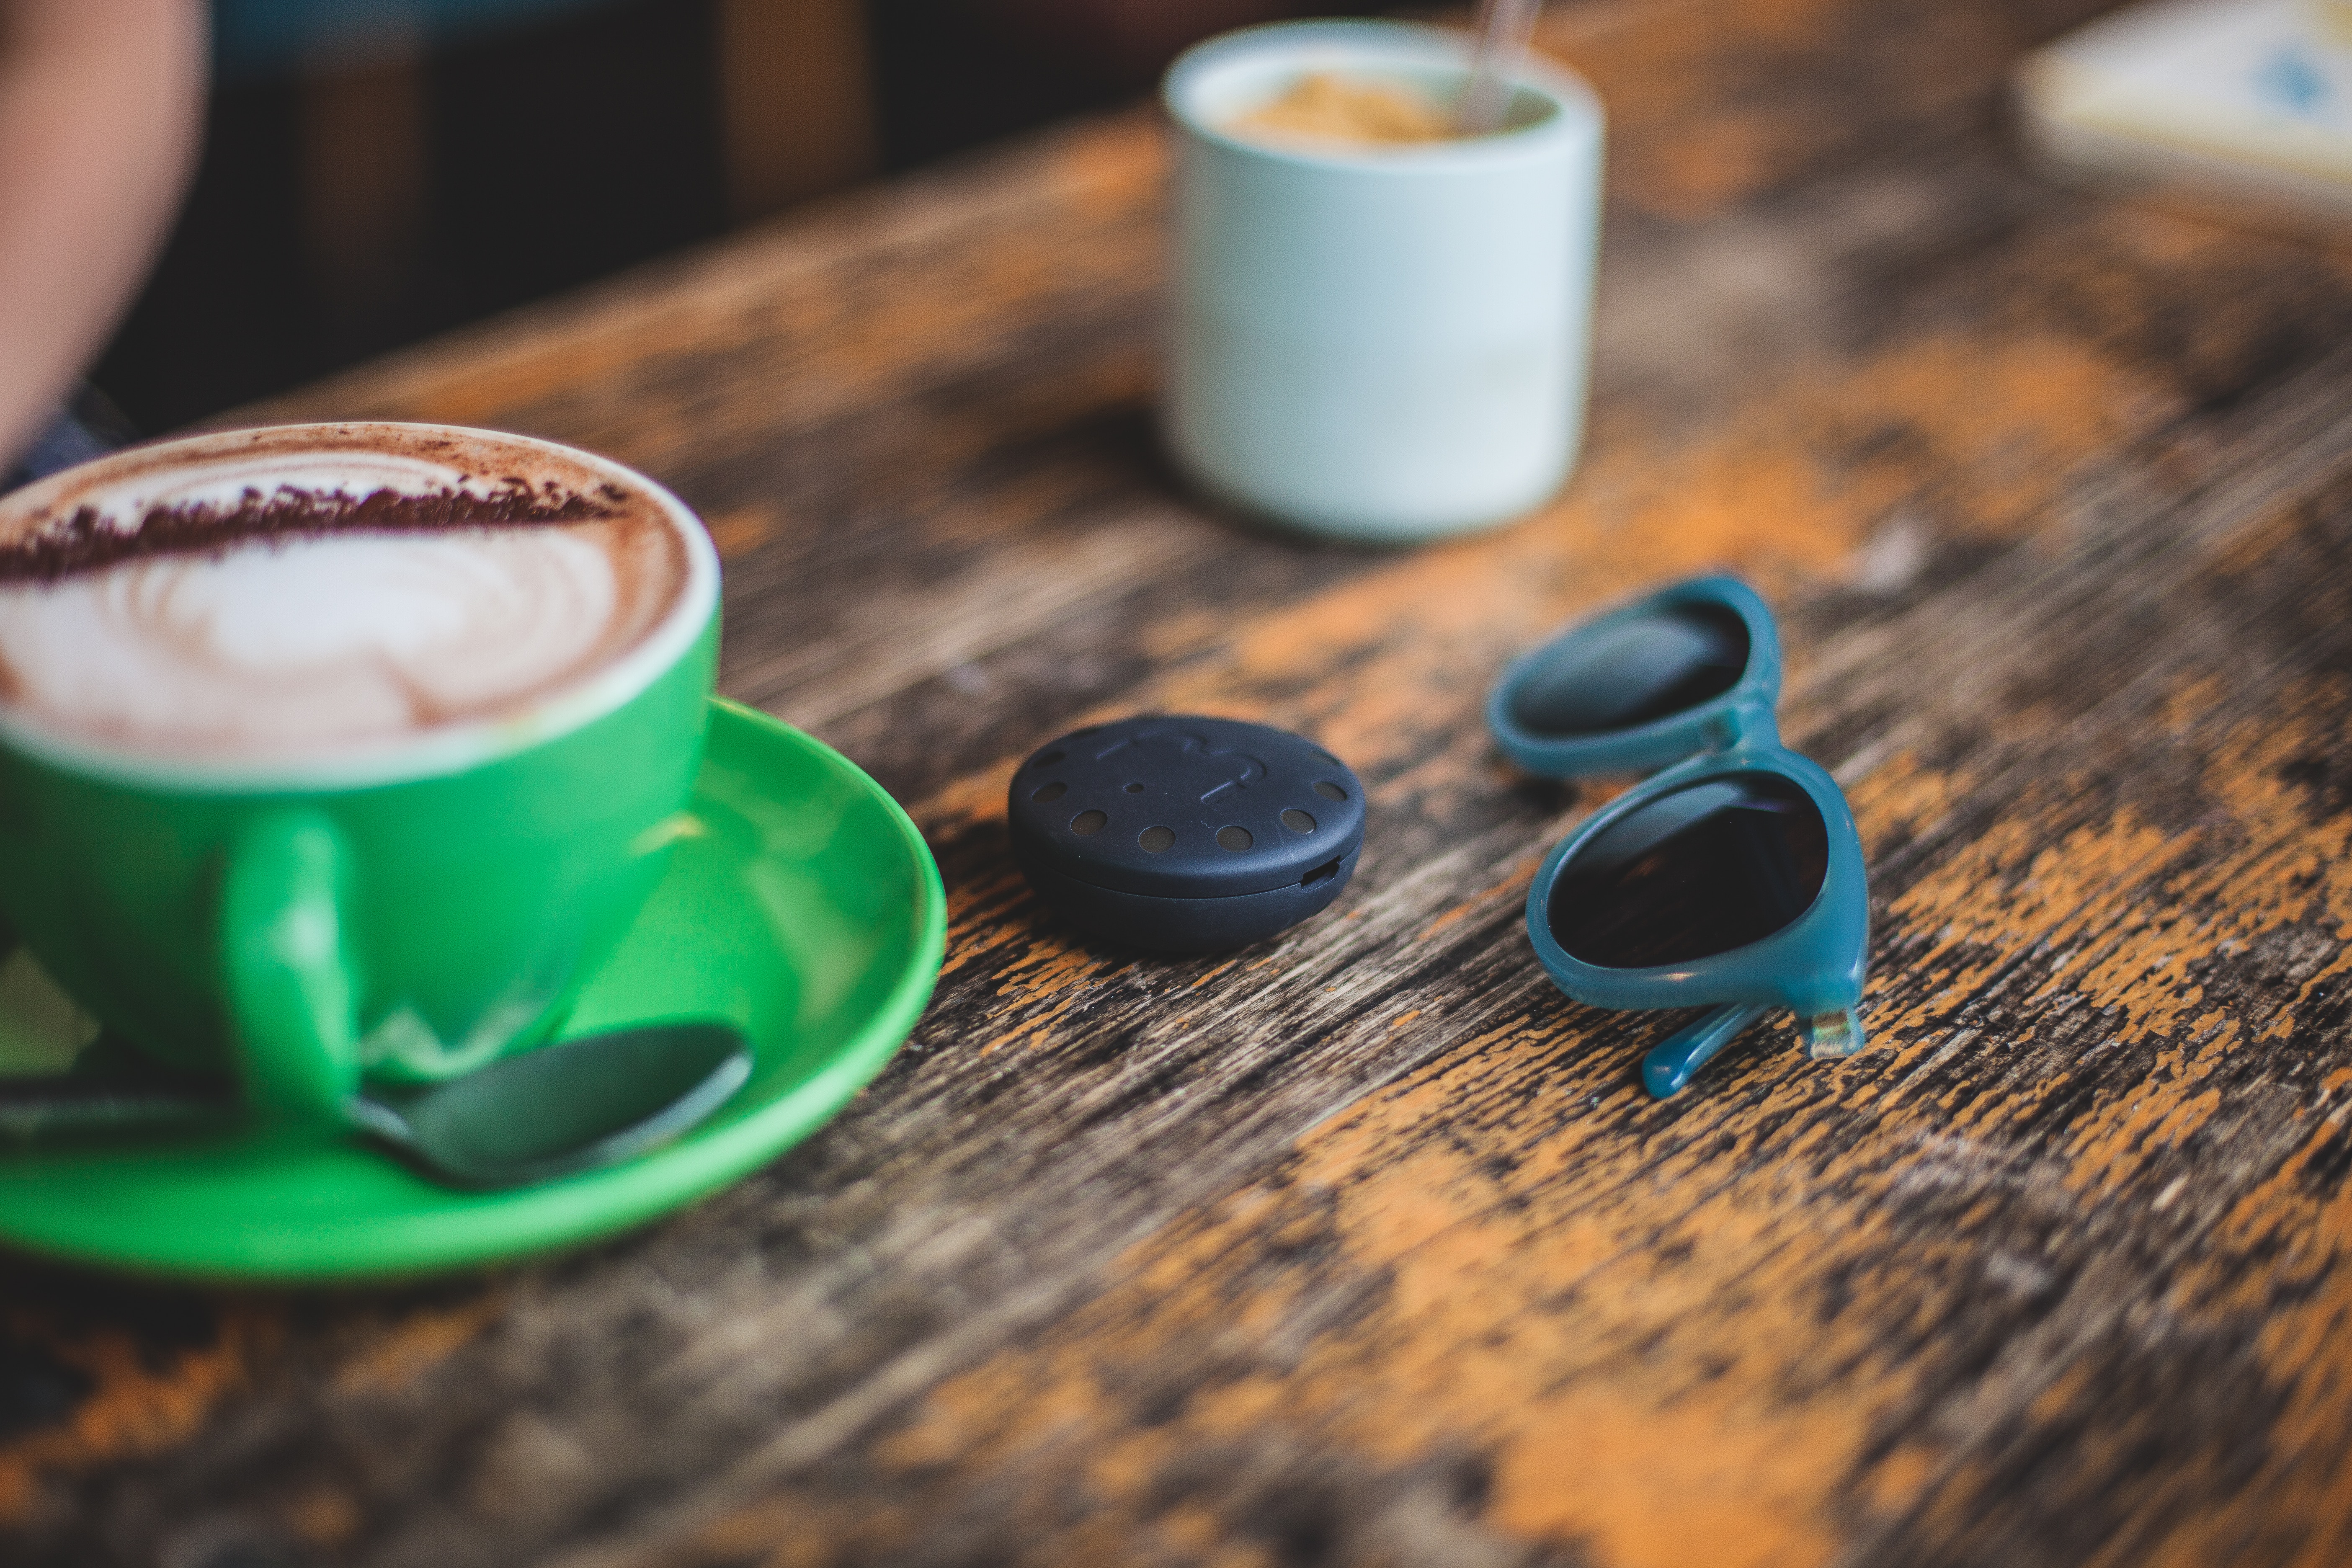 blue frame black lens sunglasses beside black round plastic container and green ceramic teacup filled with cappuccino